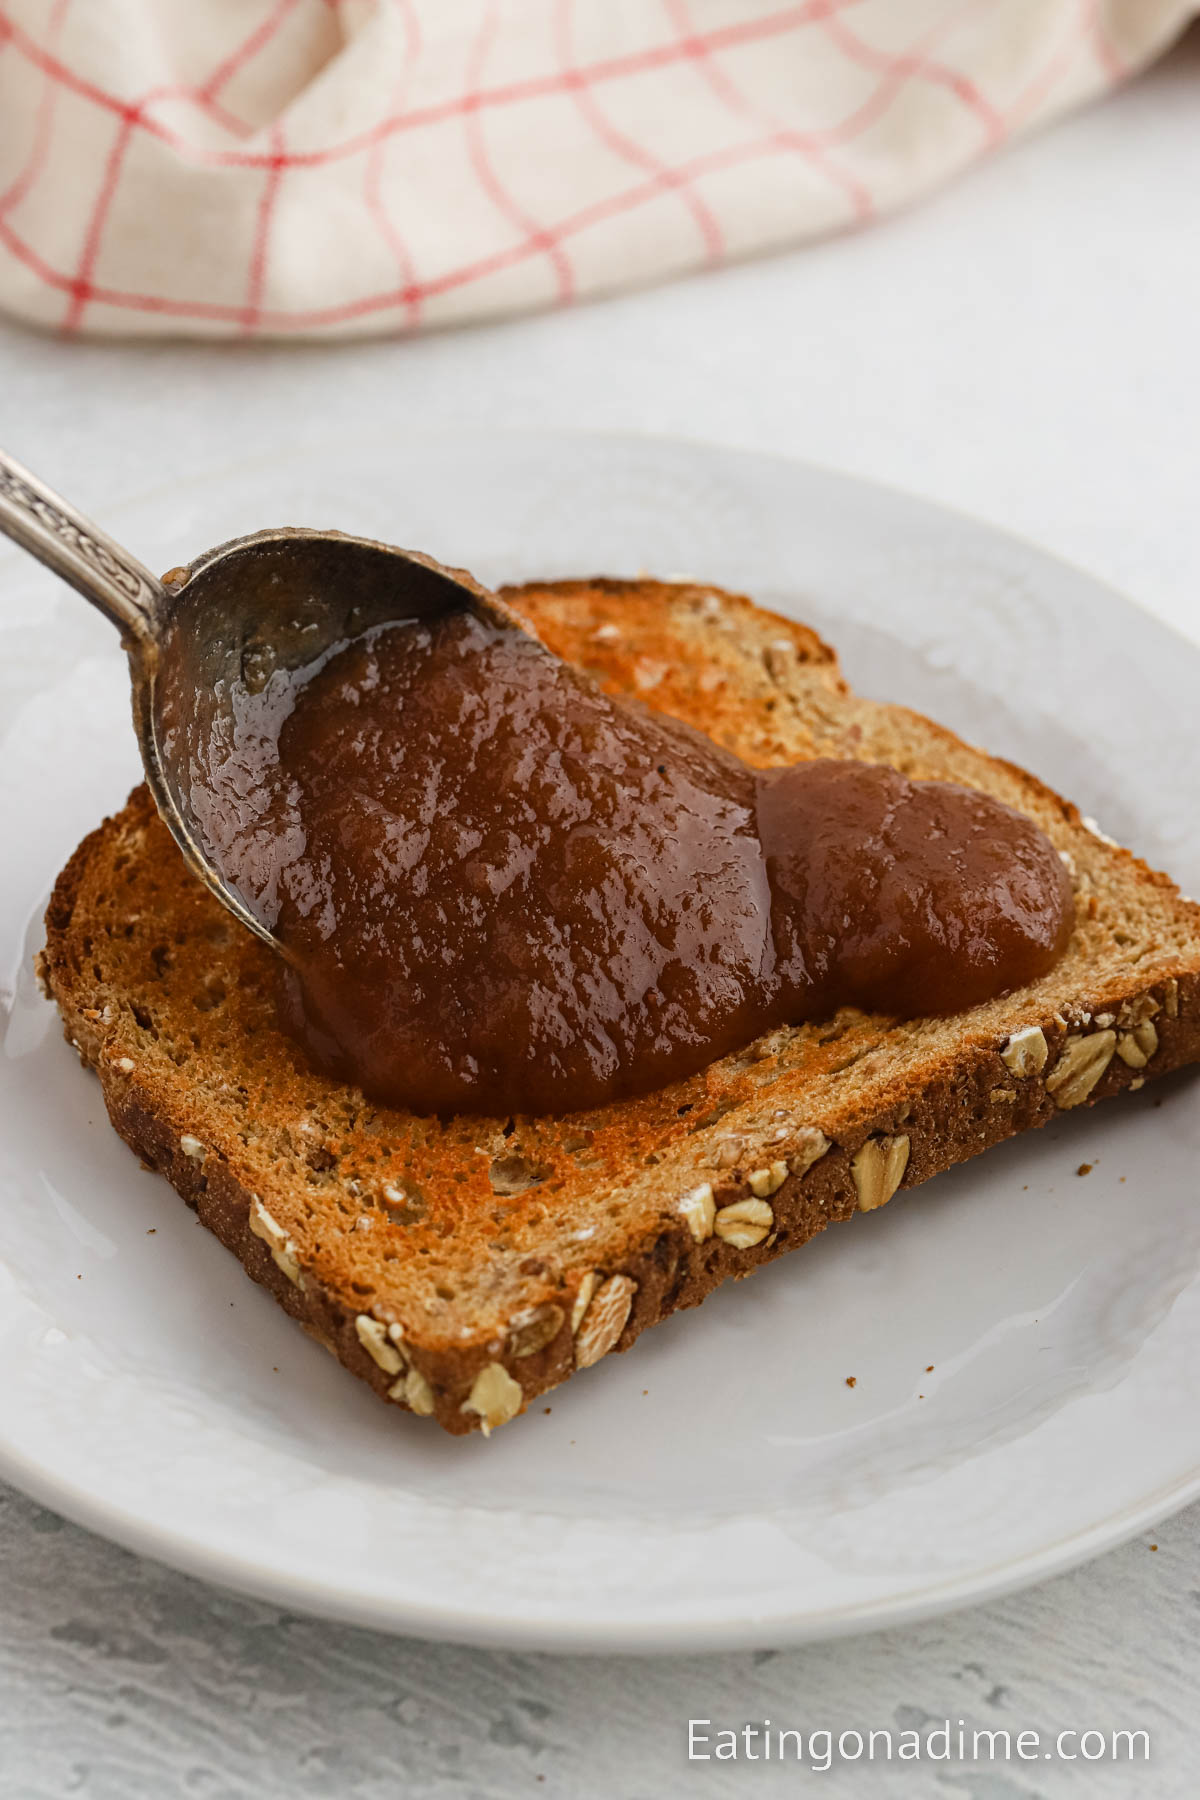 Apple butter spread on a piece of toast